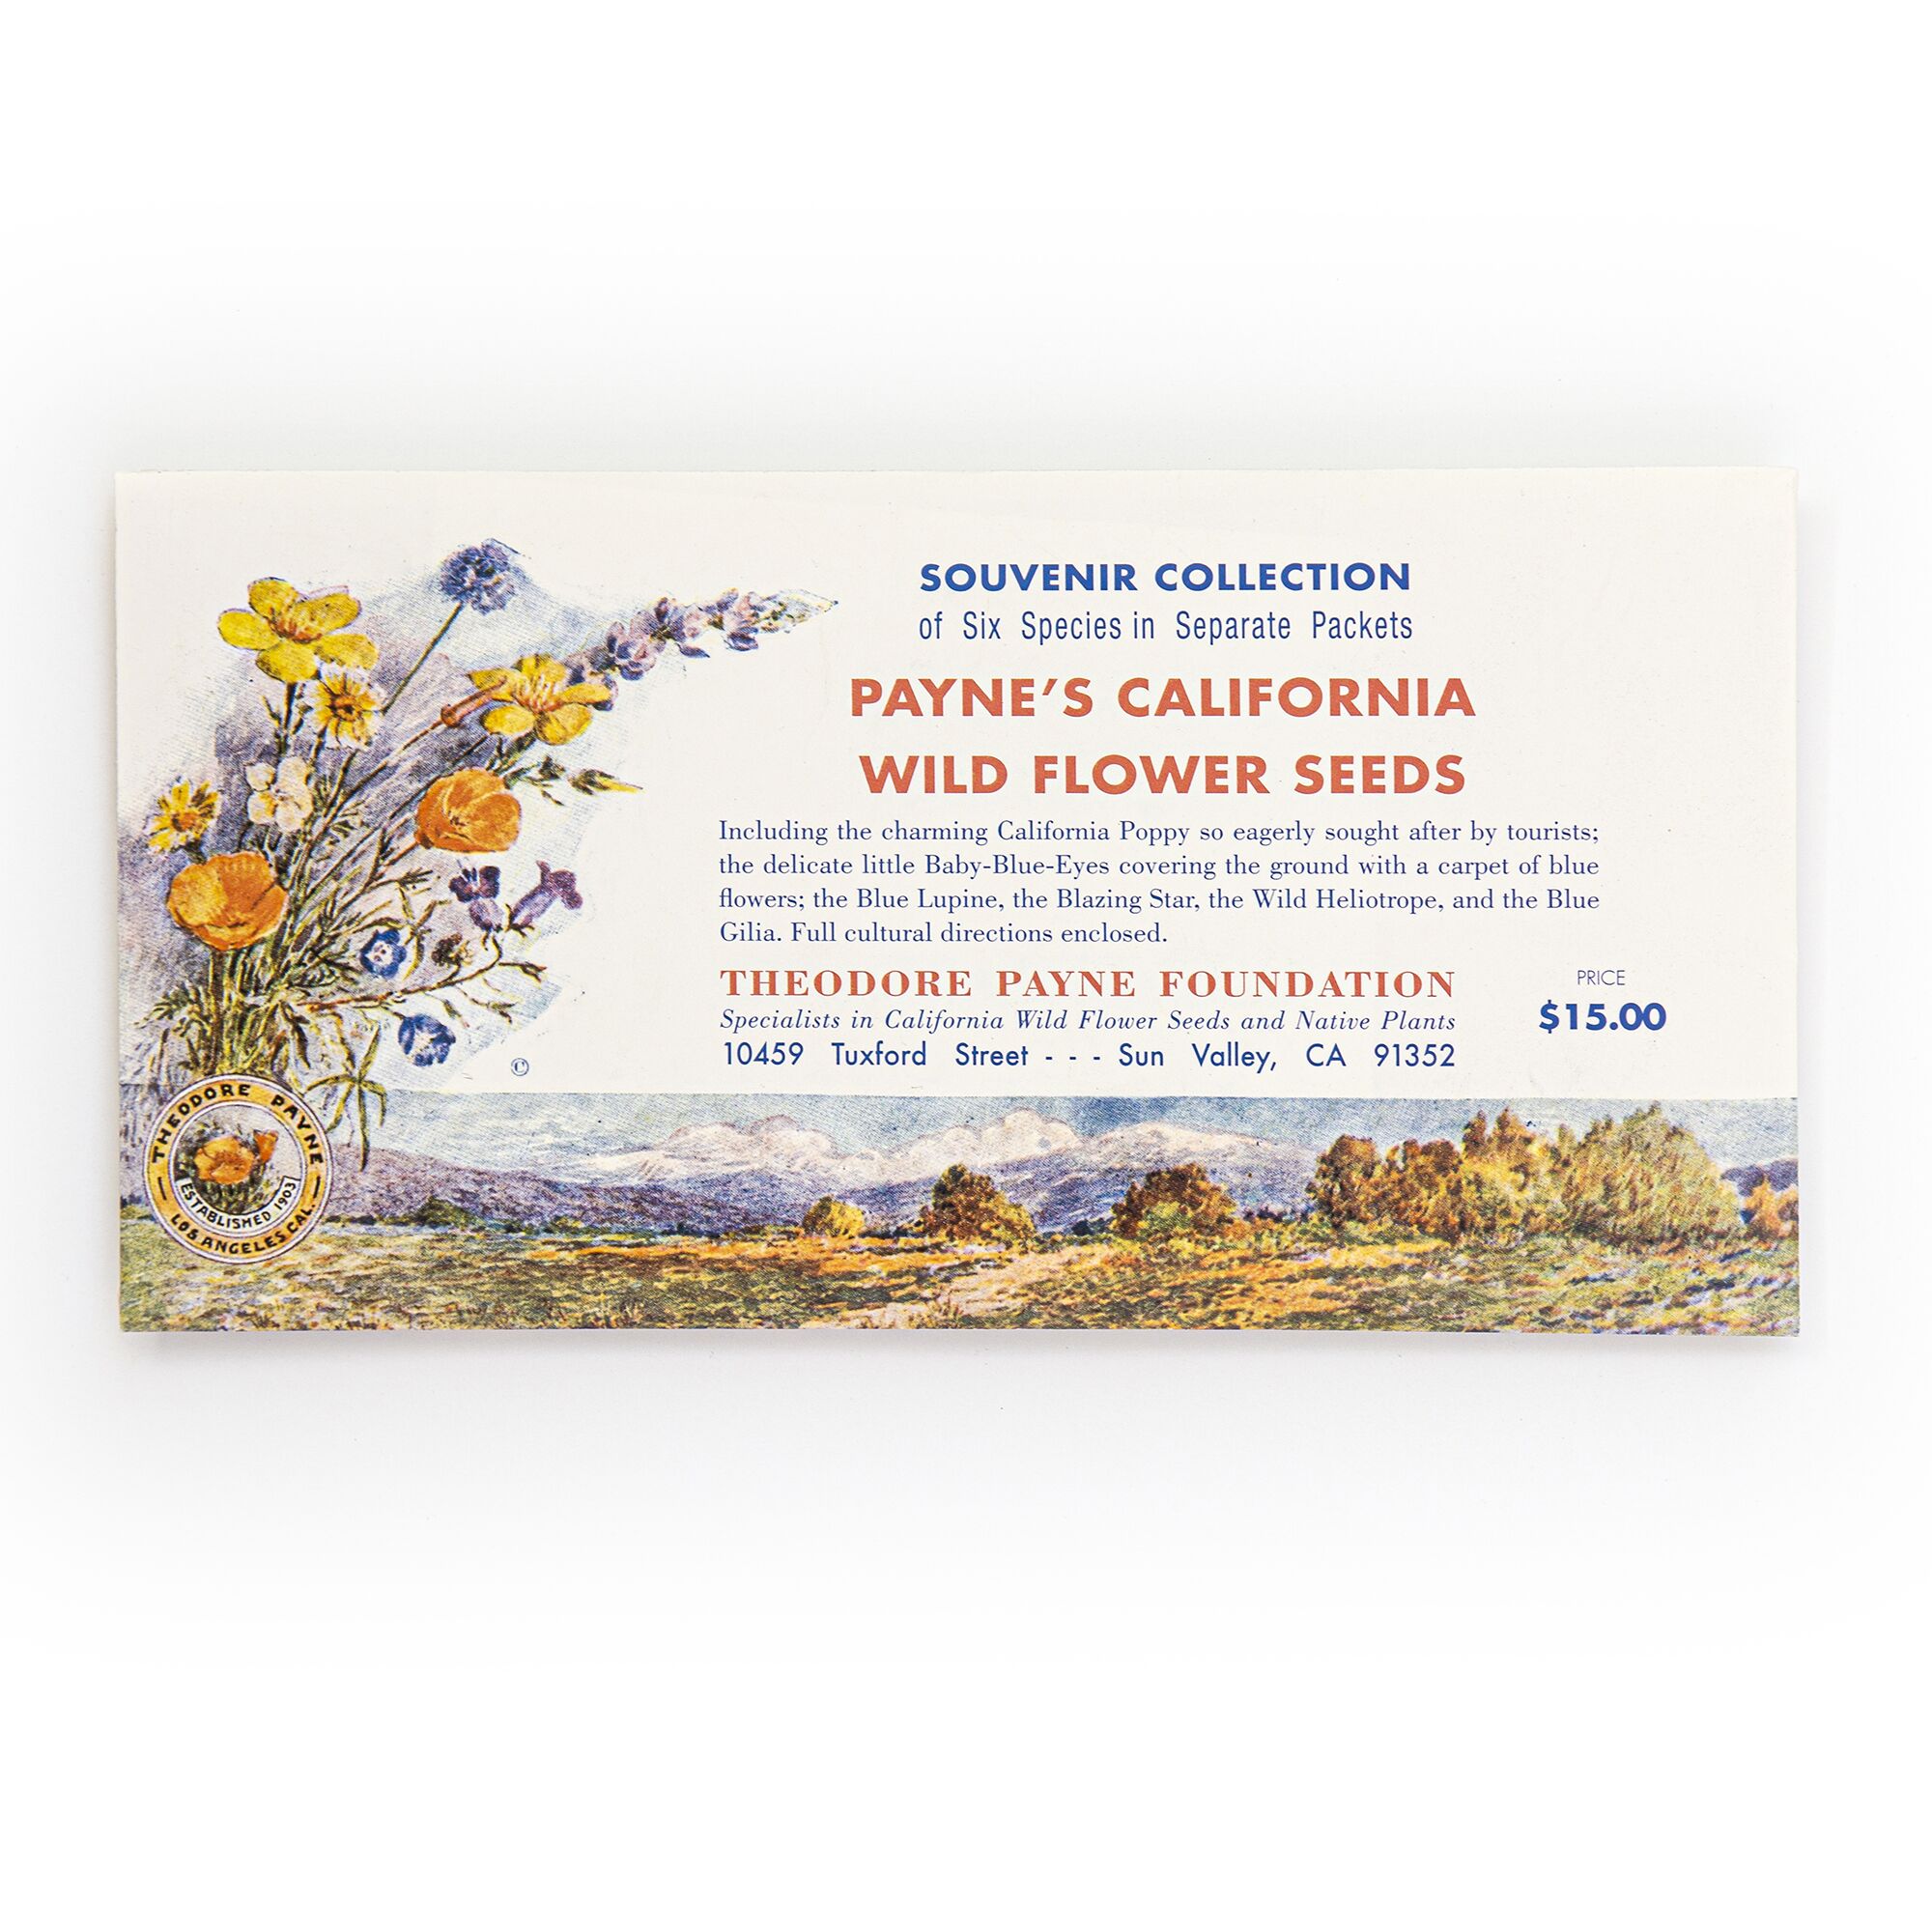 Souvenir Seed Collection from Theodore Payne